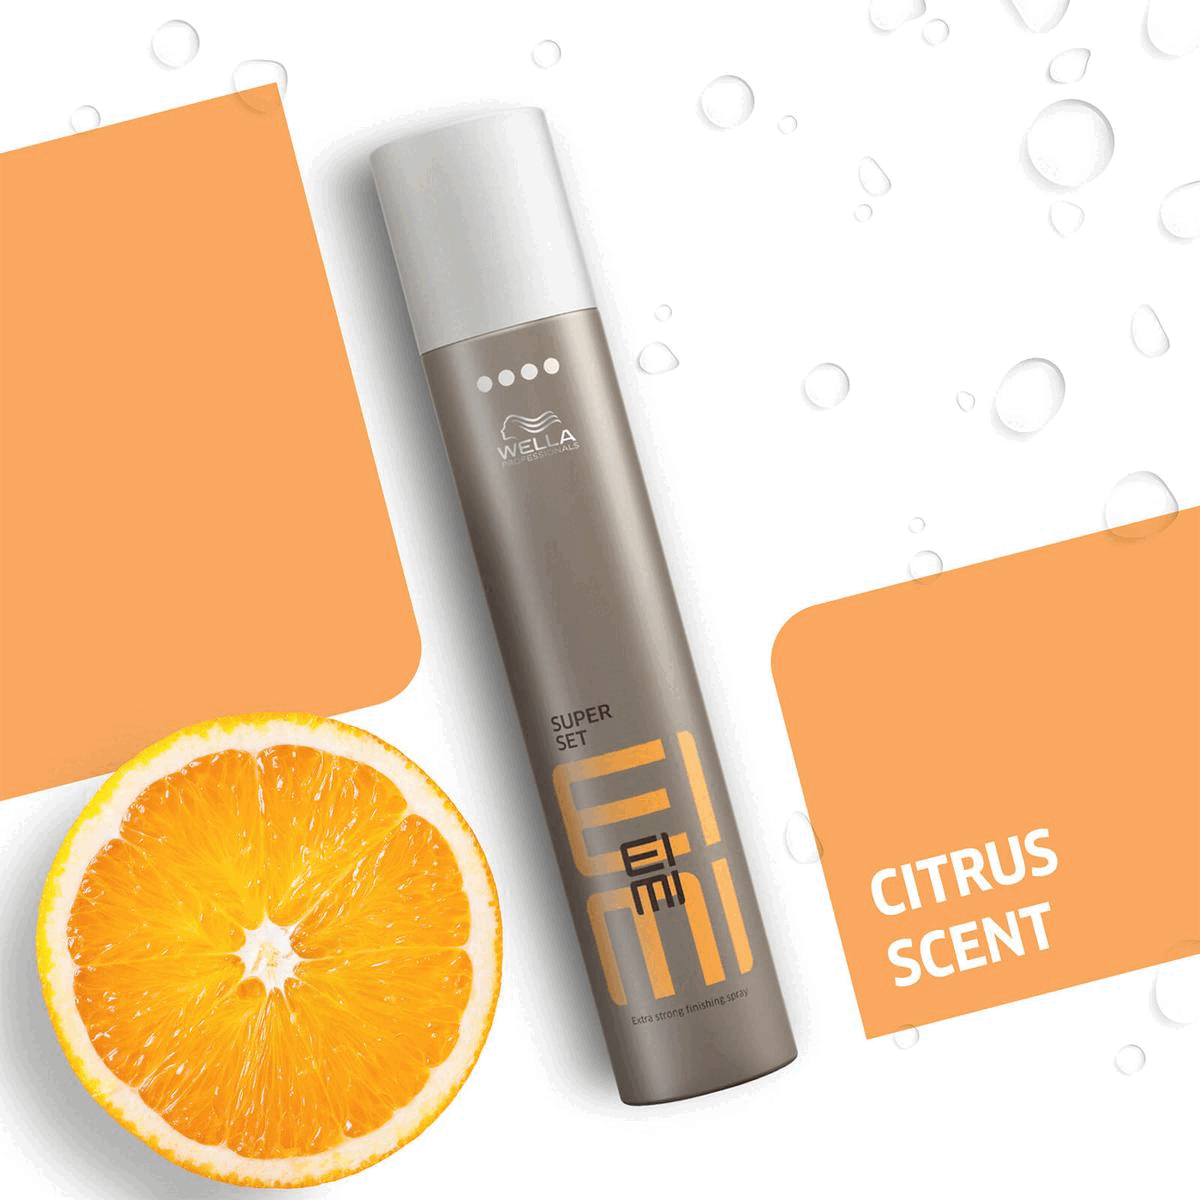 cirtus scent. Fixing hairspray - extra strong finishing spray. Hold - 4. extra strong and hair protection. discover other products